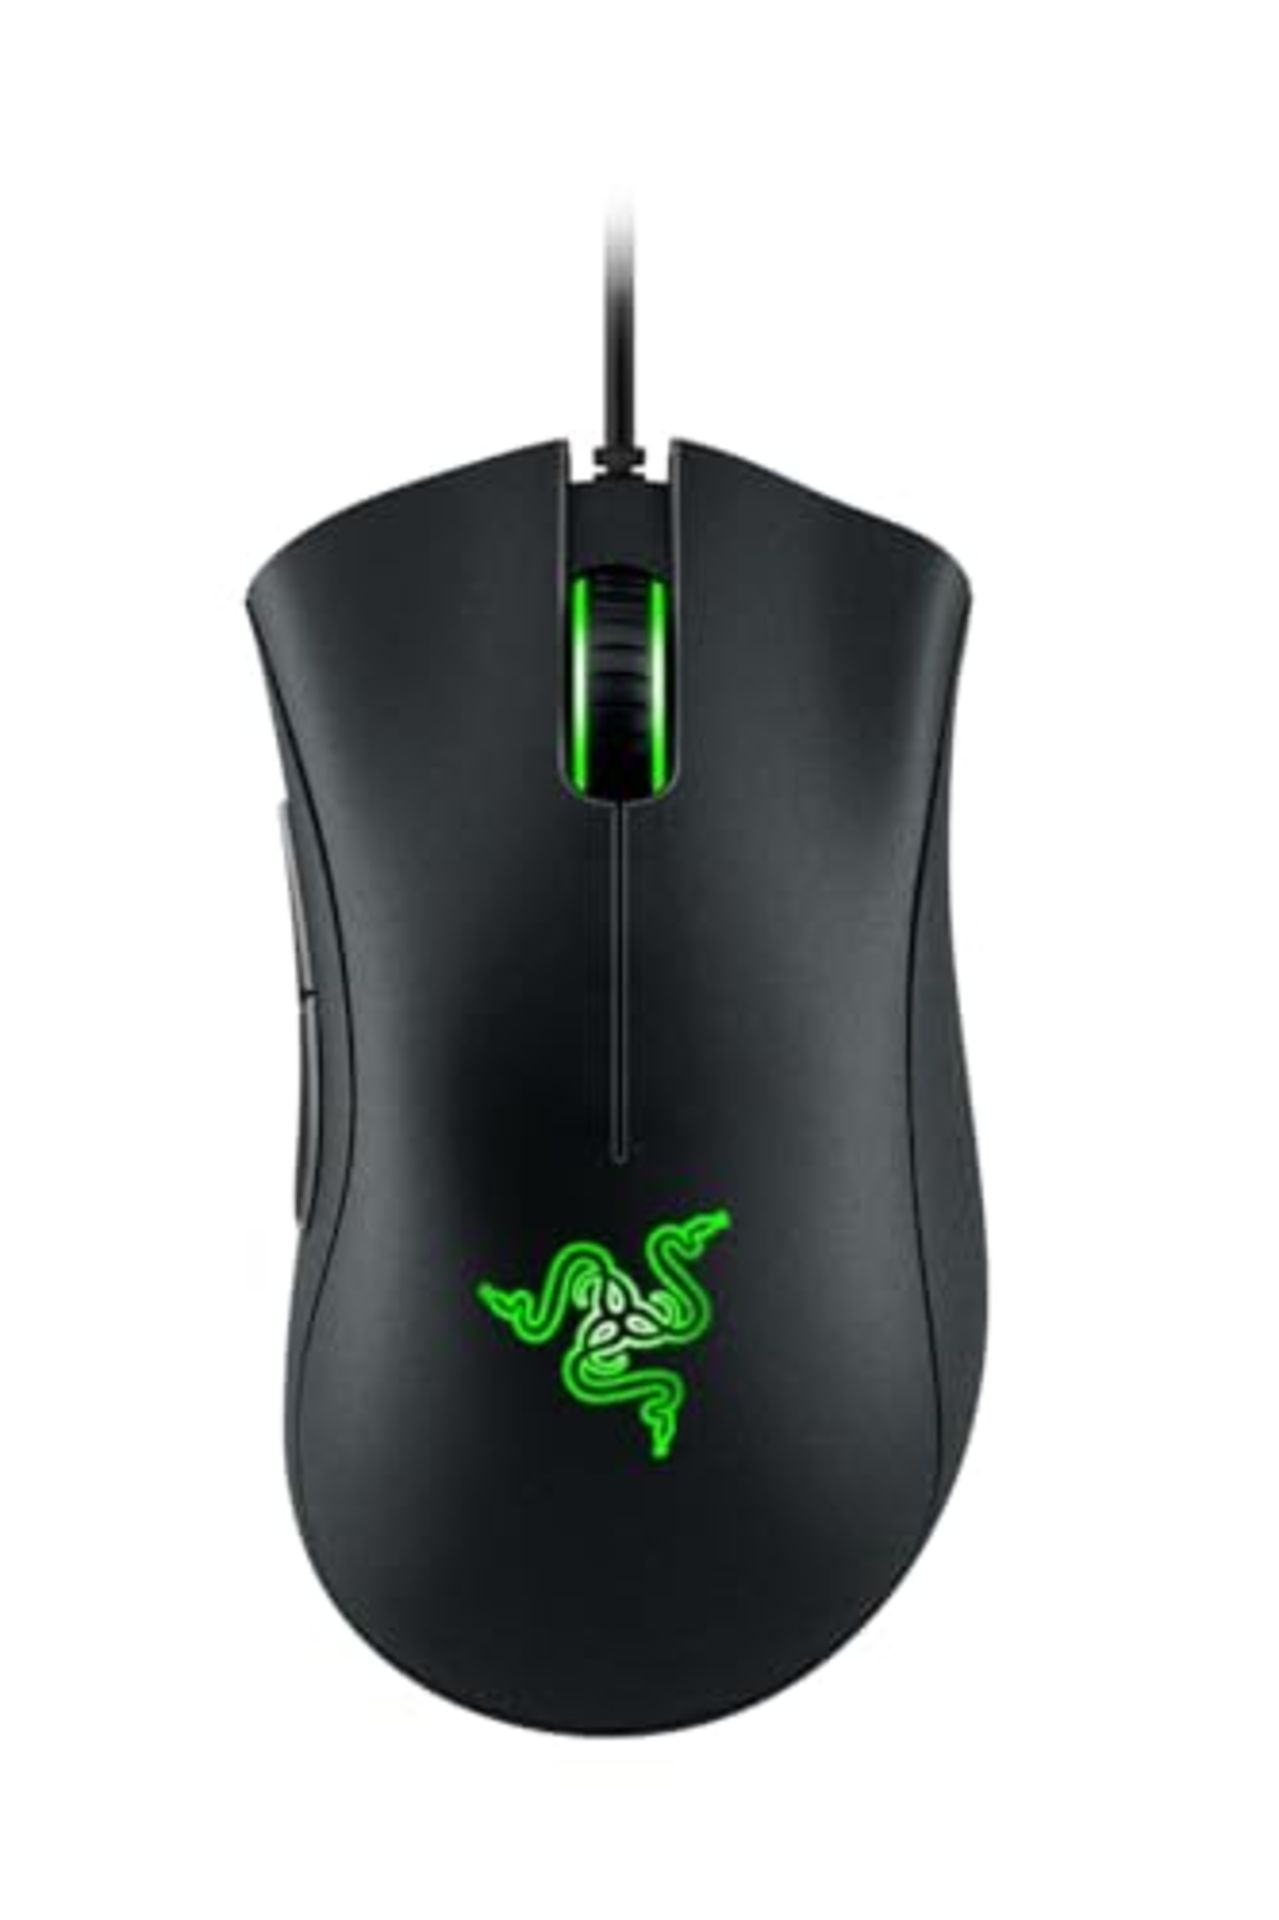 Razer DeathAdder Essential (2021) - Wired Gaming Mouse with 6400 DPI Optical Sensor (E